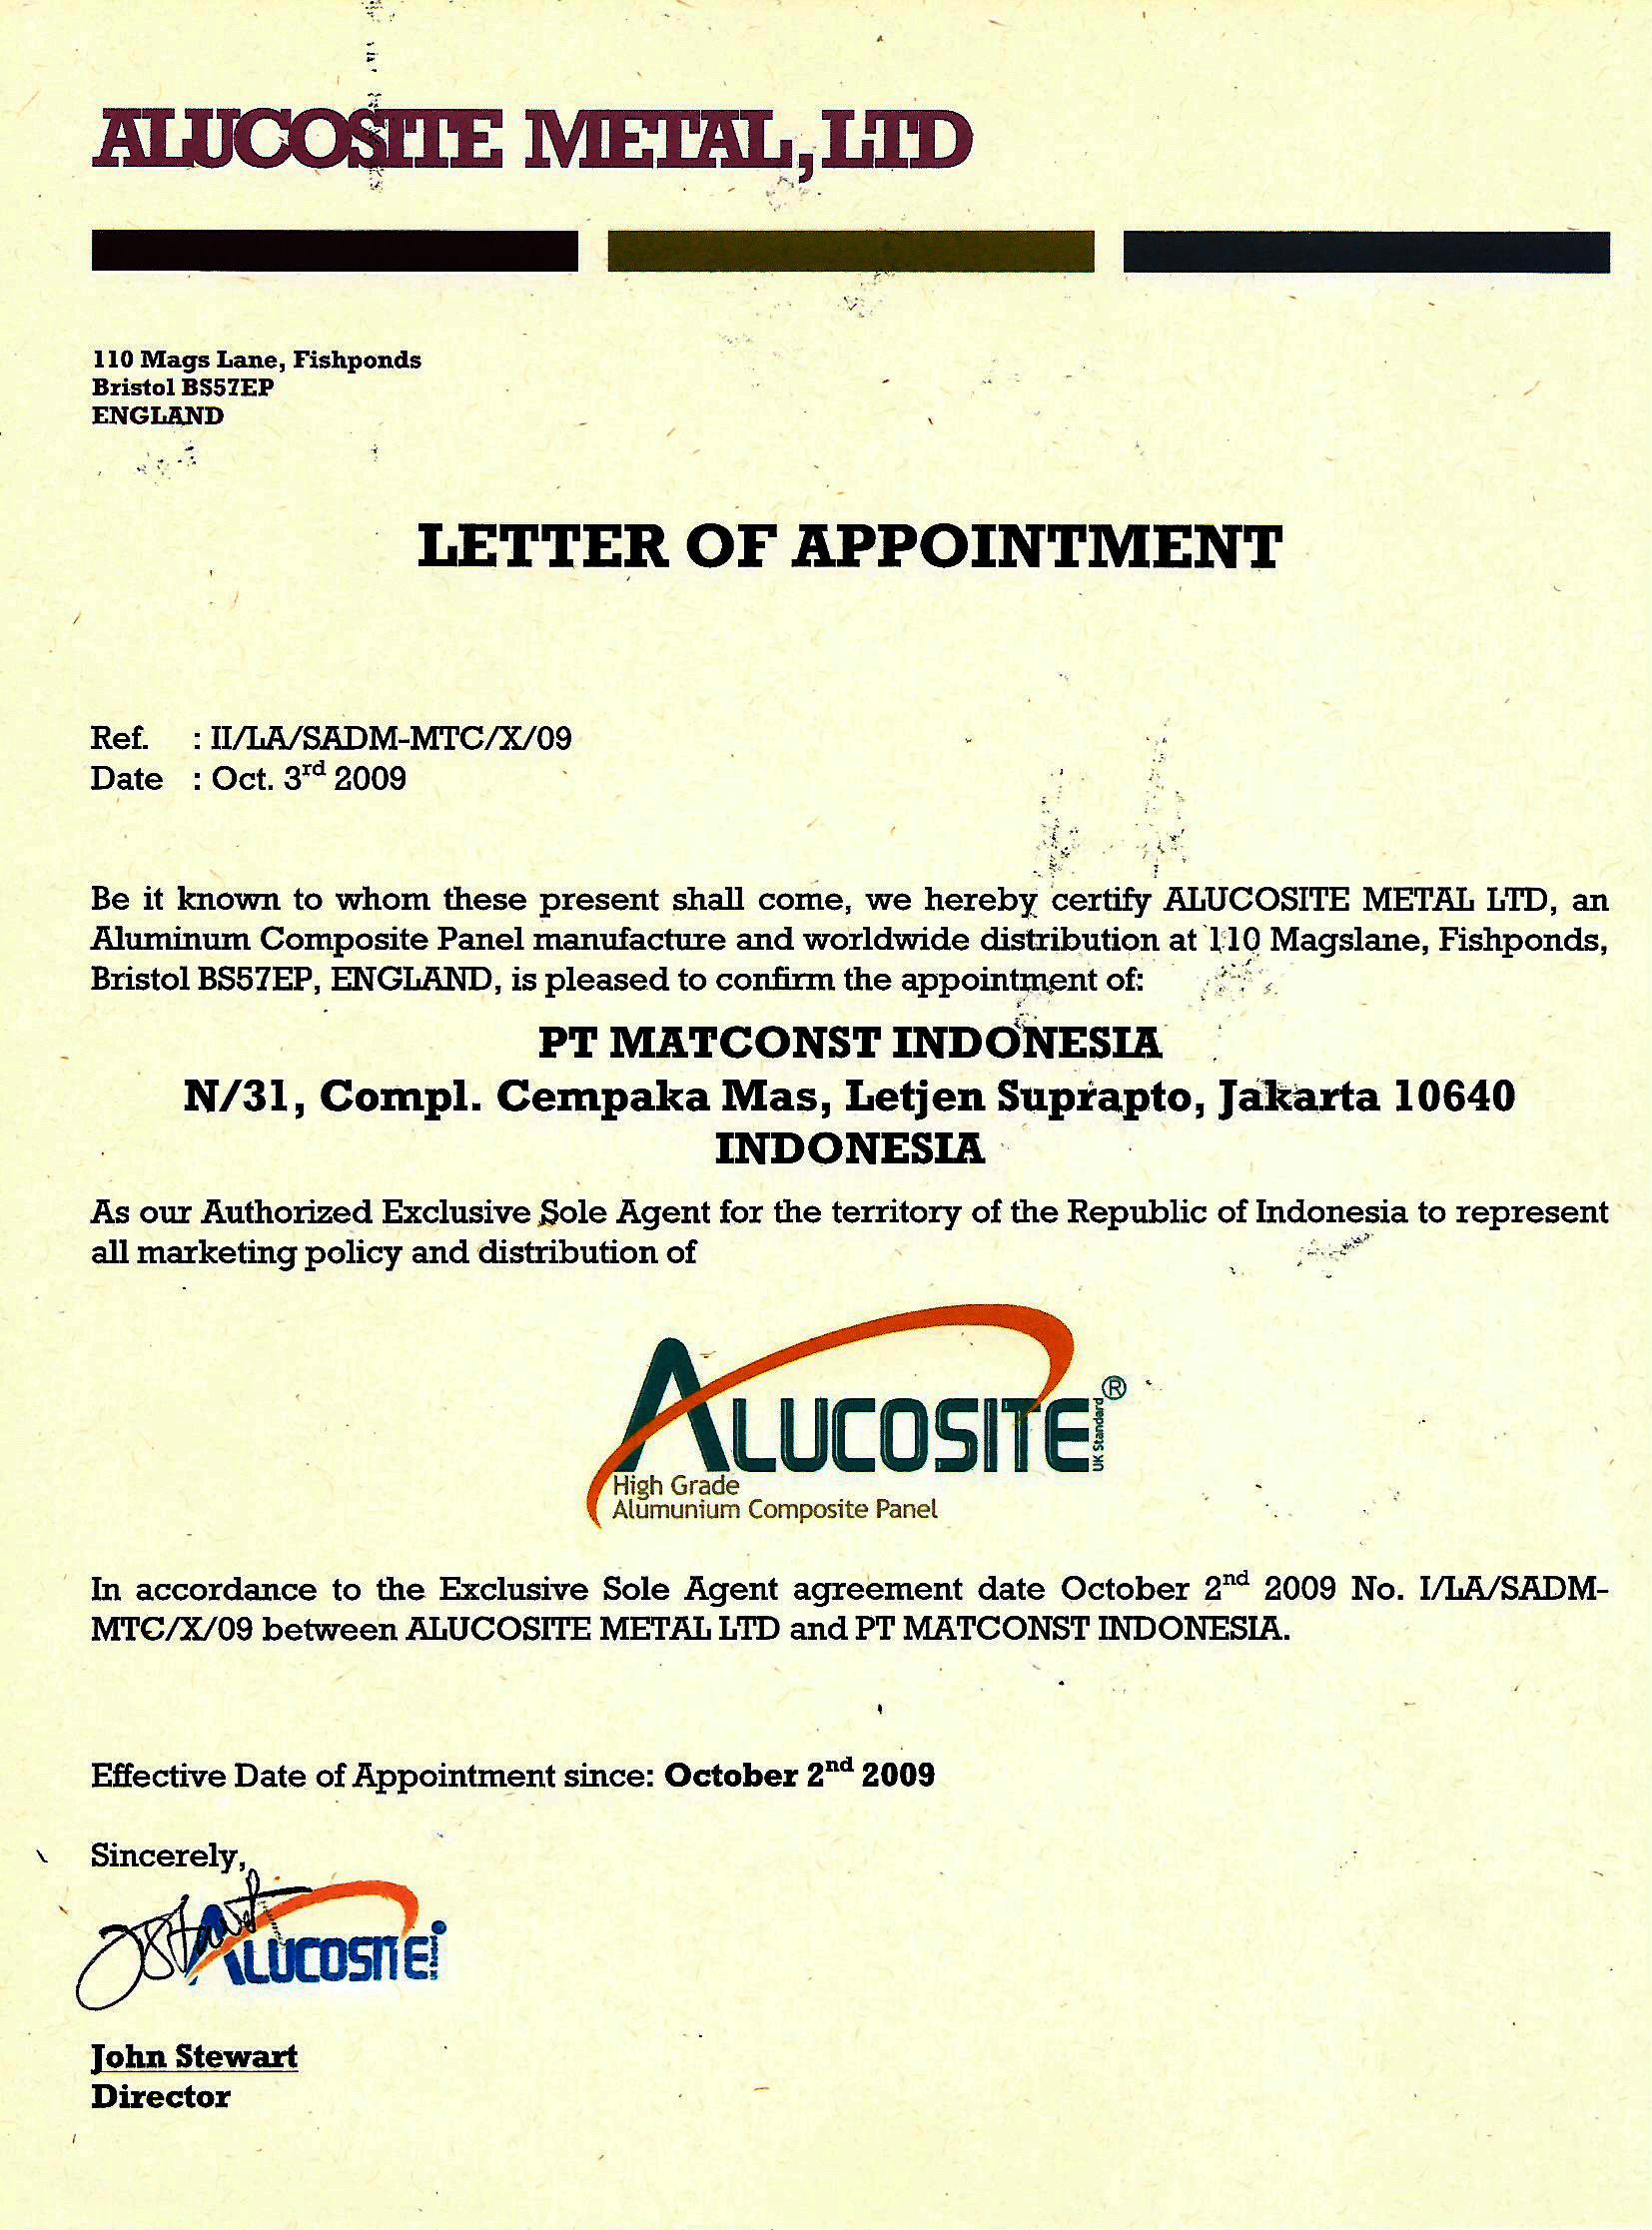 Alucosite Letter of Appointment Certificate